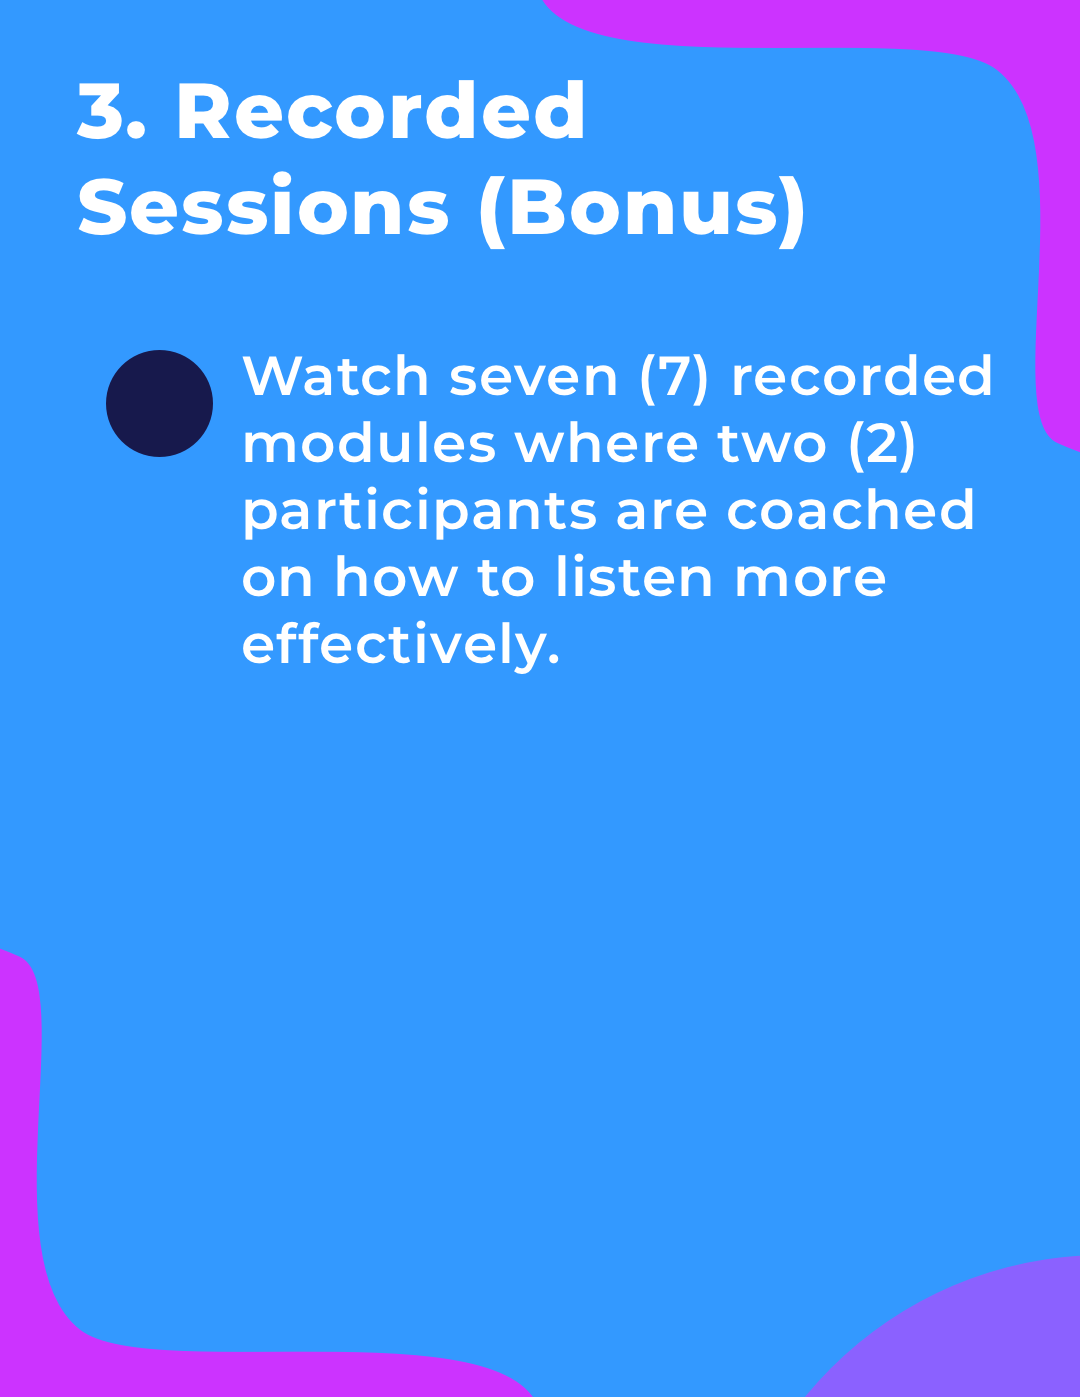 Recorded sessions (bonus) watch 7 recorded modules where 2 participants are coached